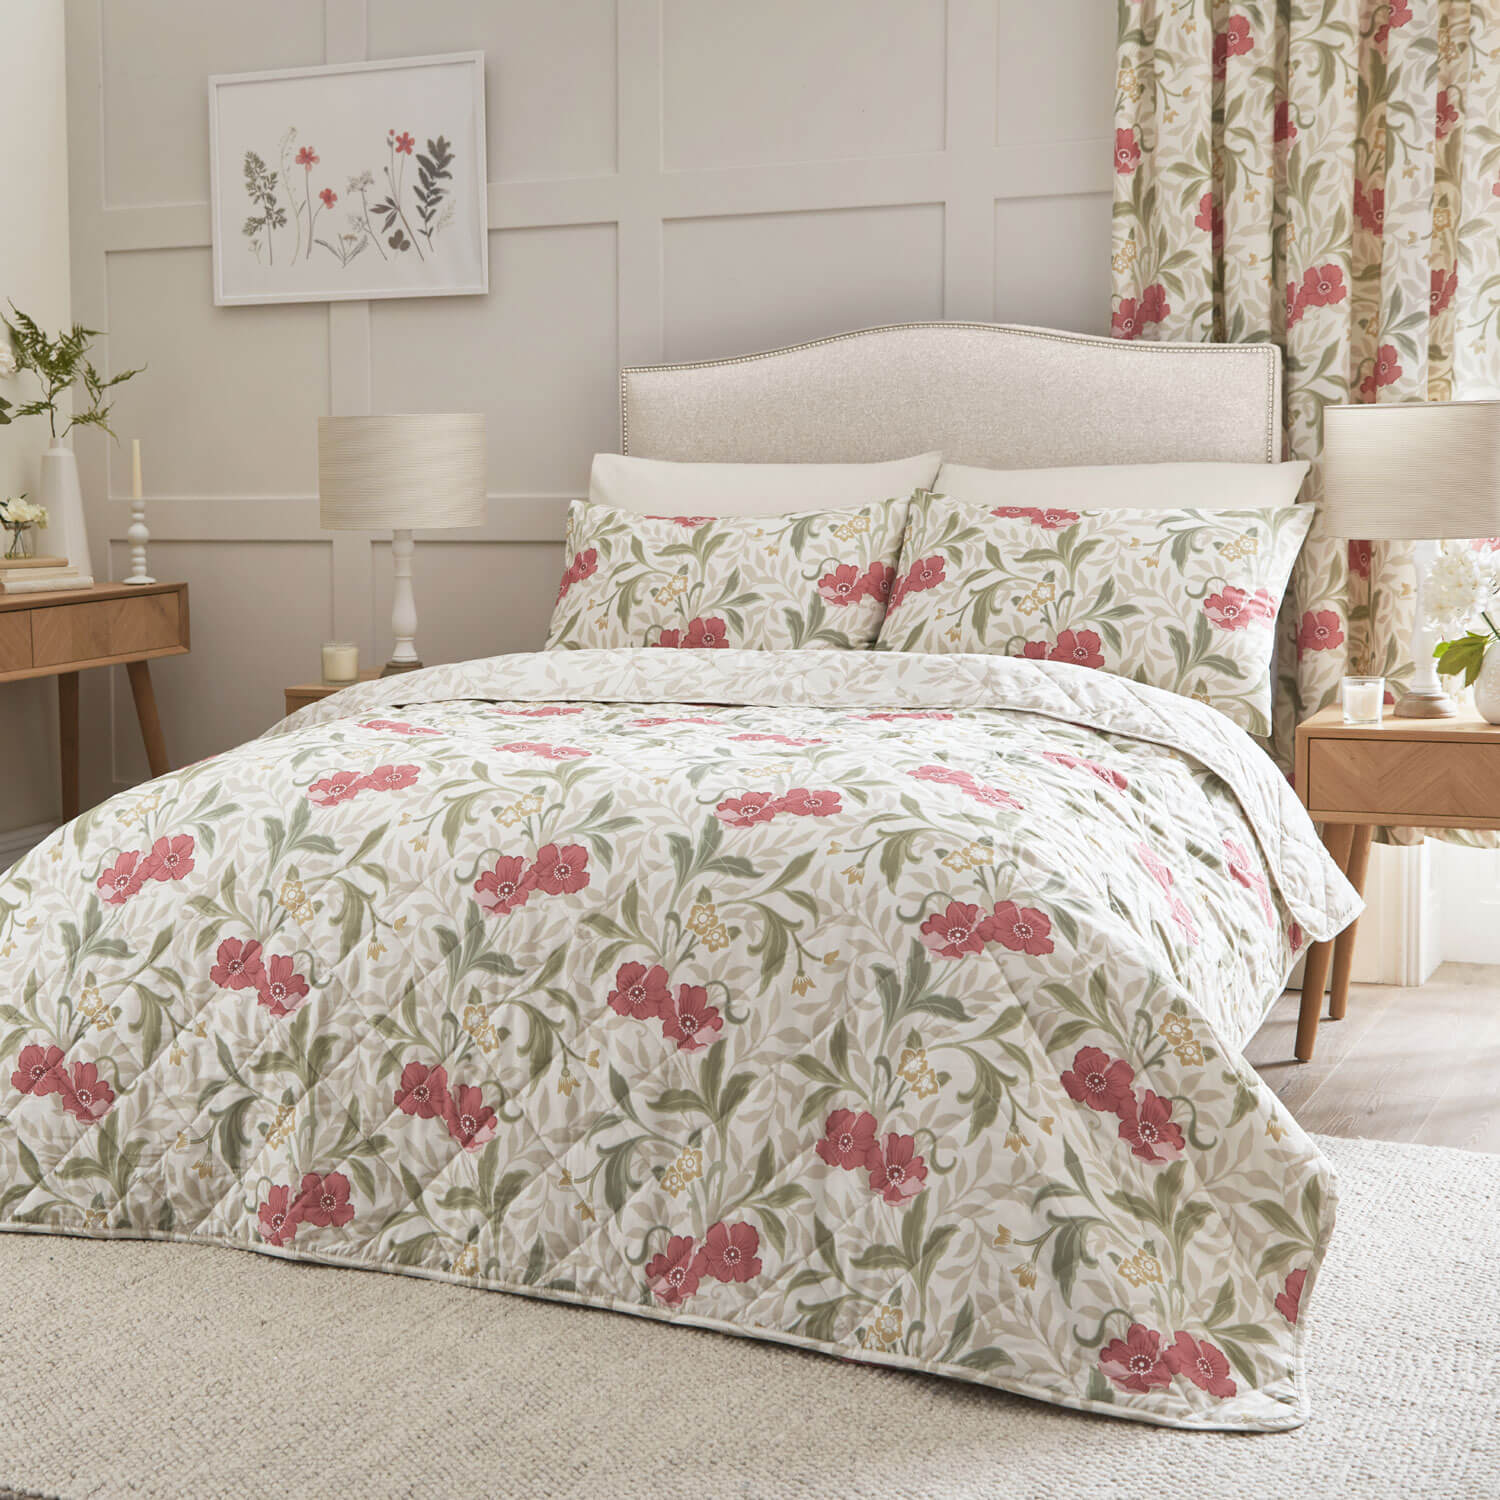 The Home Collection Windsor Bedspread - Red 1 Shaws Department Stores